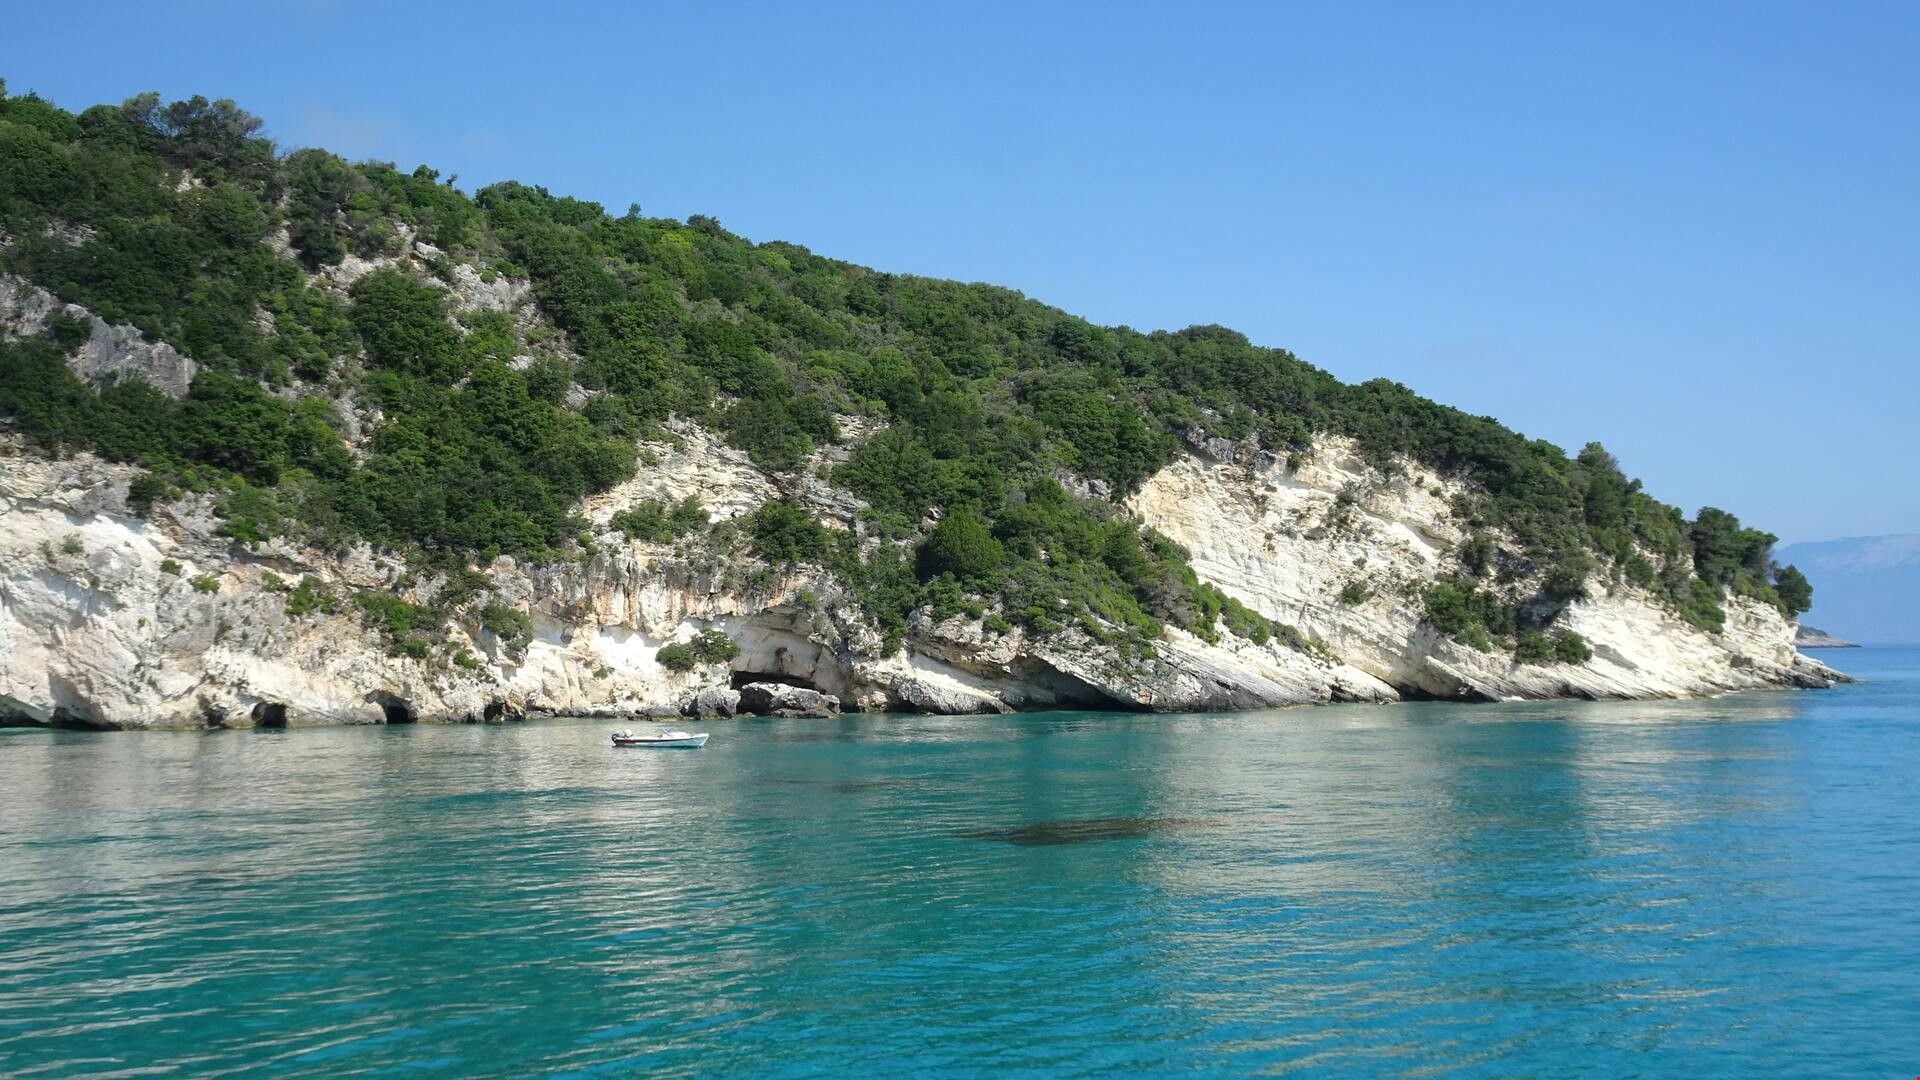 Digital Nomads accommodation in Ionian Islands)